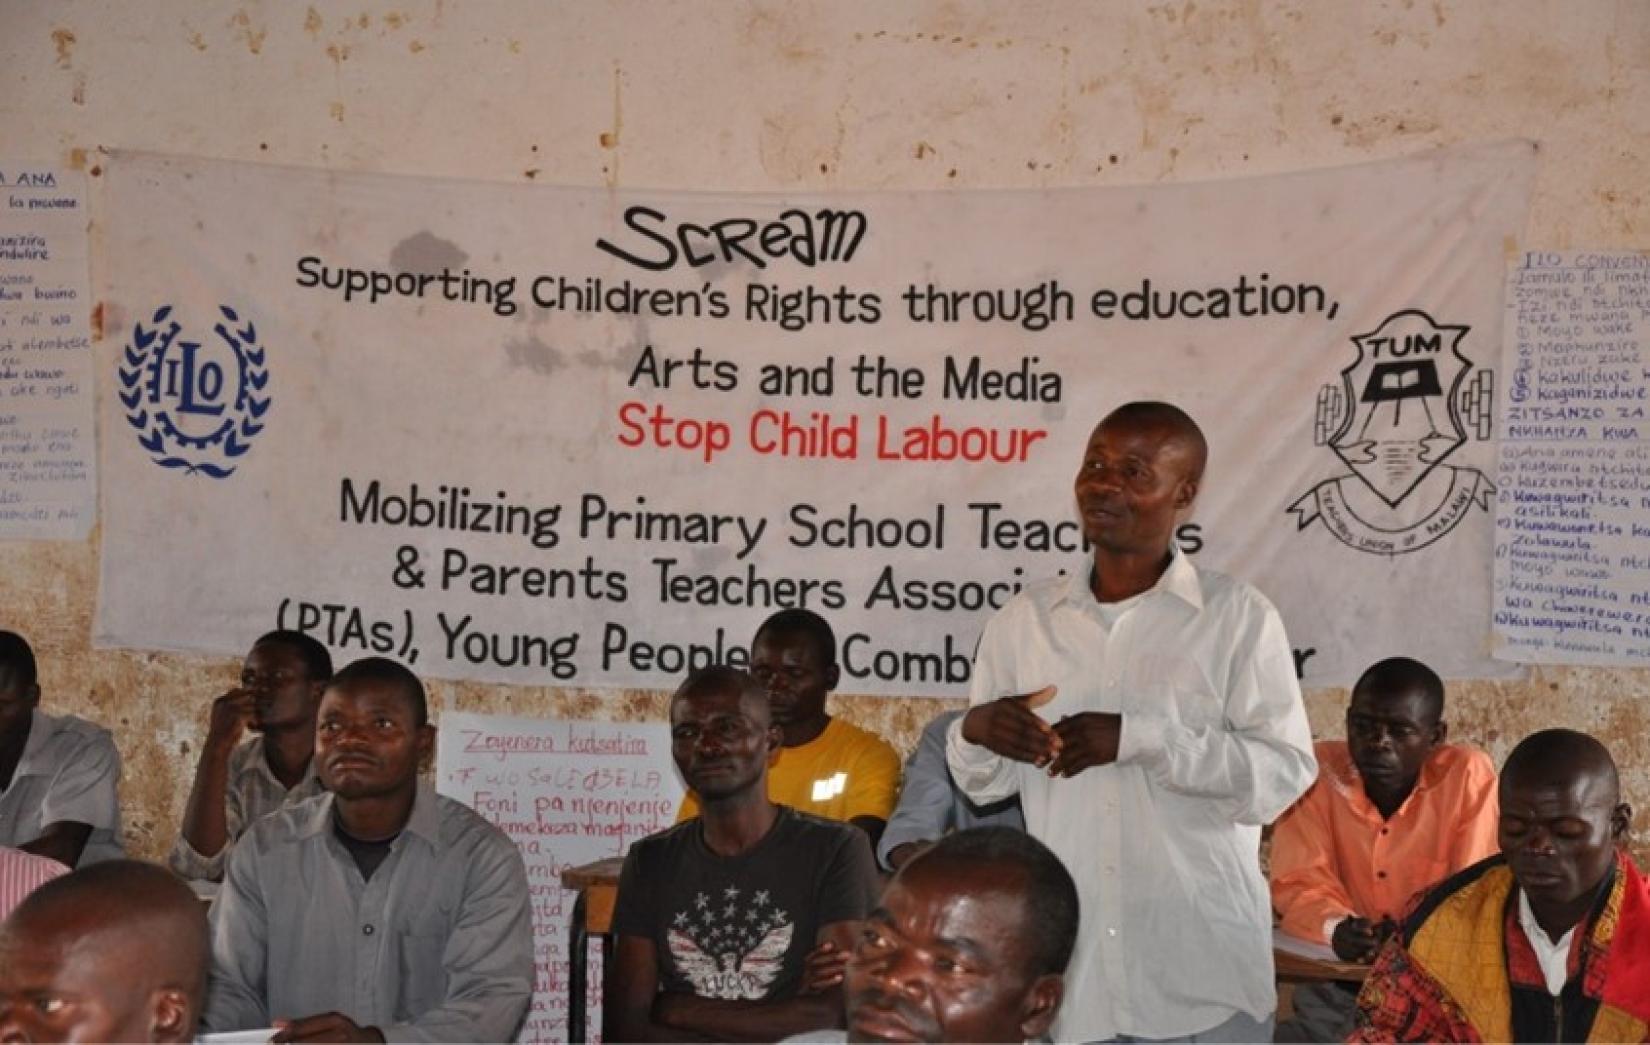 Community social dialogue session on child labour at Kanthonga Primary School in Lilongwe, Malawi (2019)